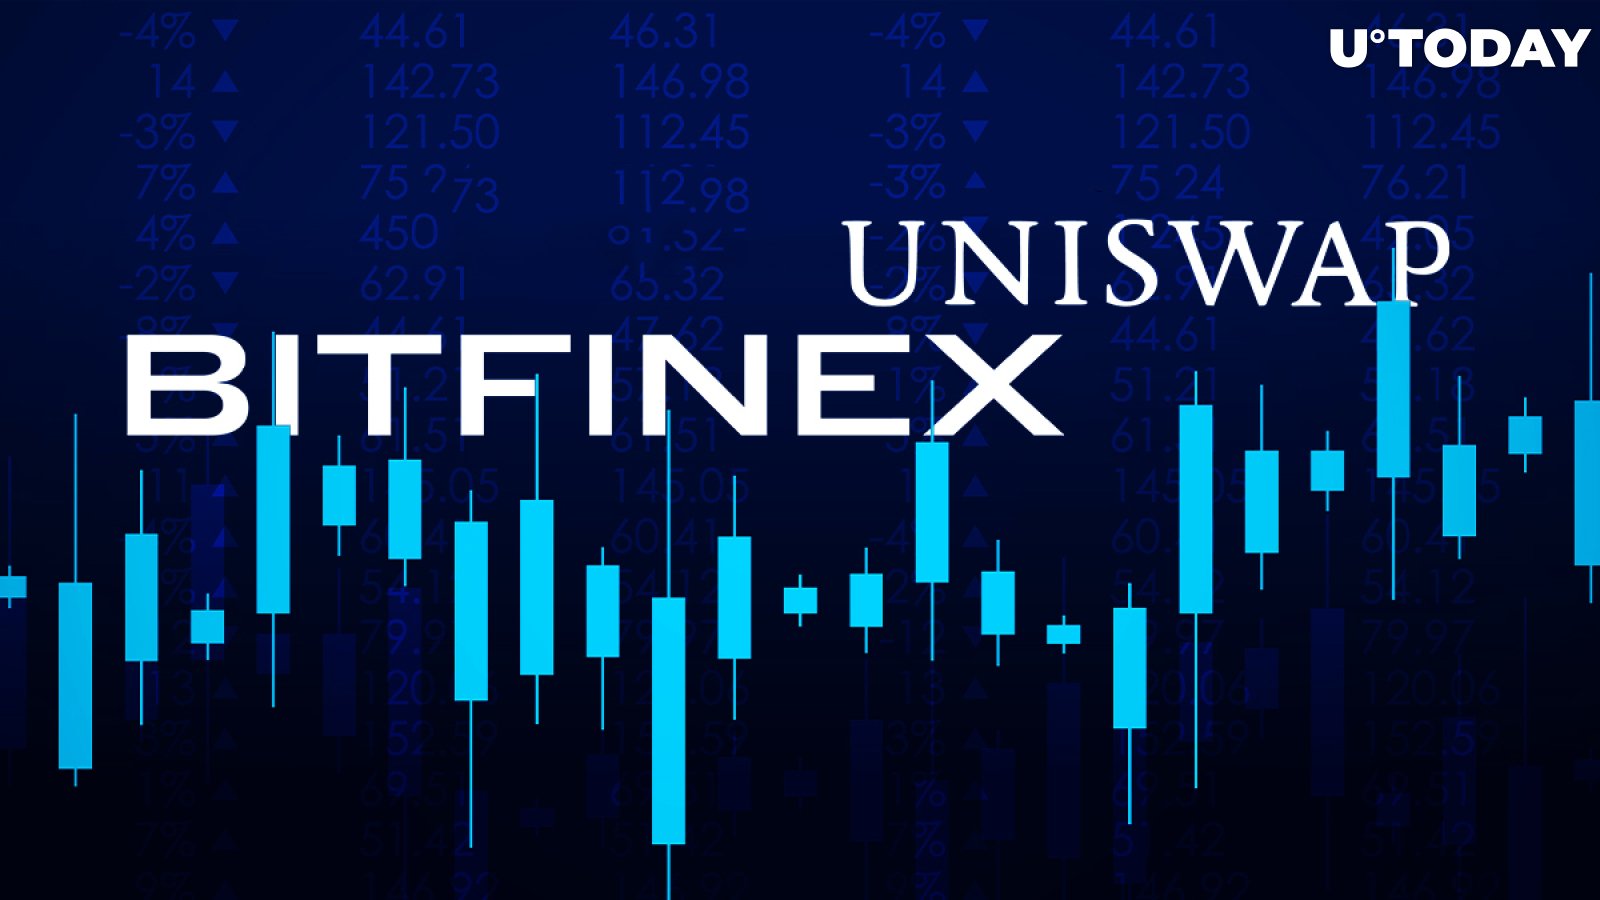 Bitfinex Lists Uniswap (UNI), Trading Against Crypto and Fiat About to Start